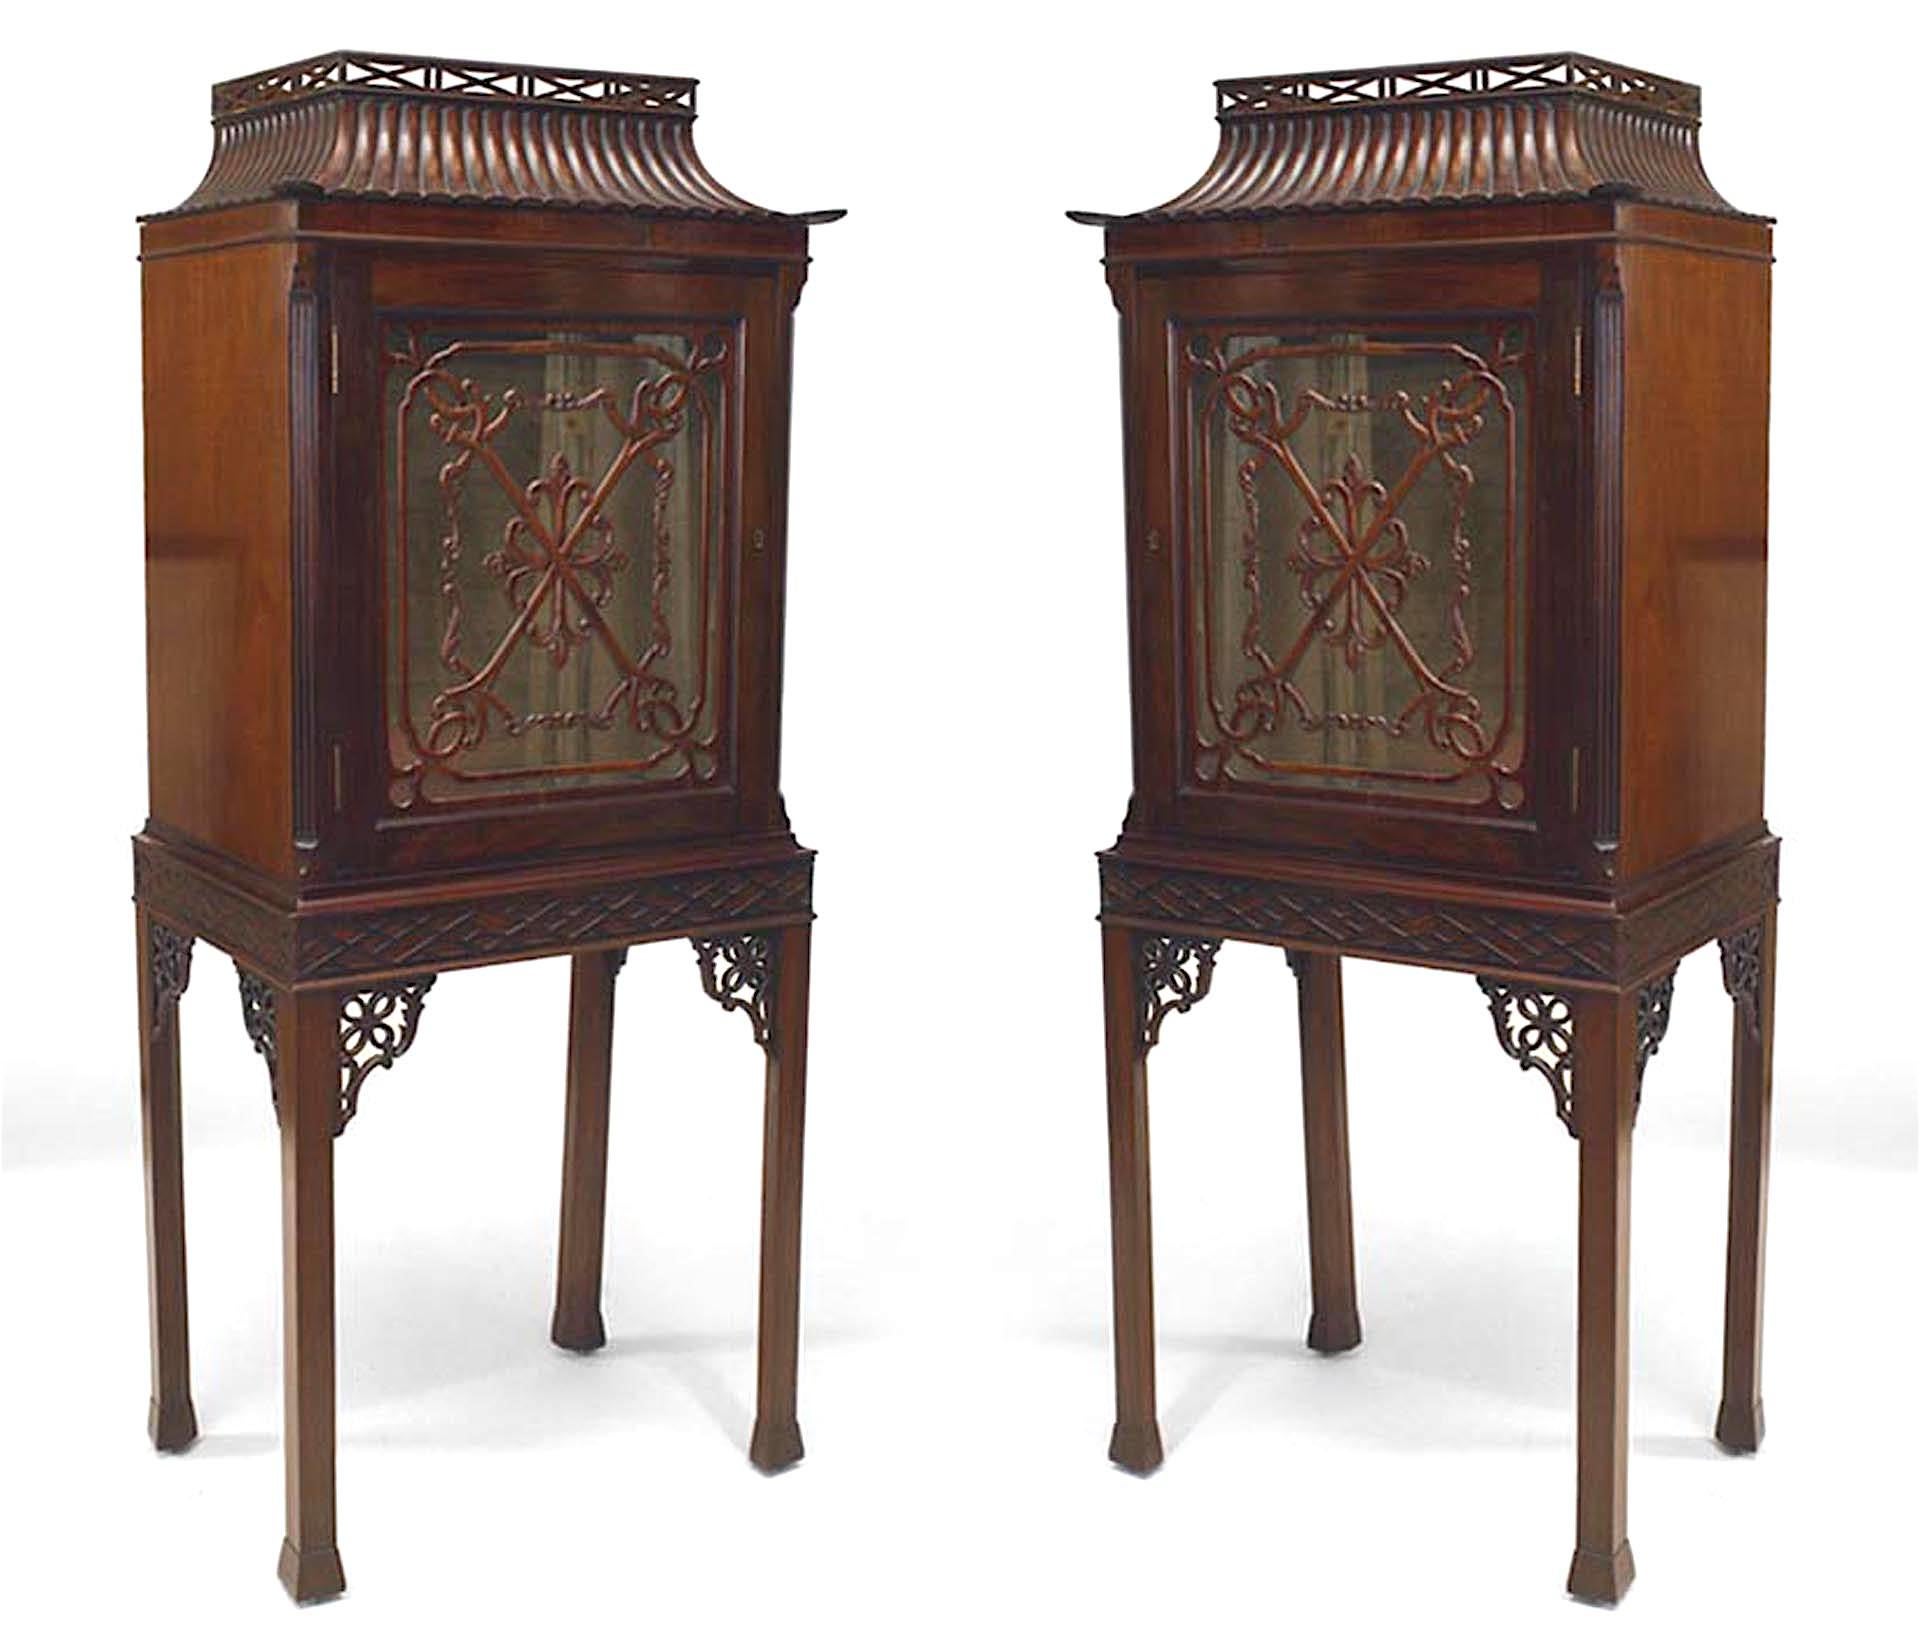 Pair of English Chinese Chippendale-style (19/20th Century) mahogany curio display cabinets with glass door and pagoda top. (PRICED AS Pair)
